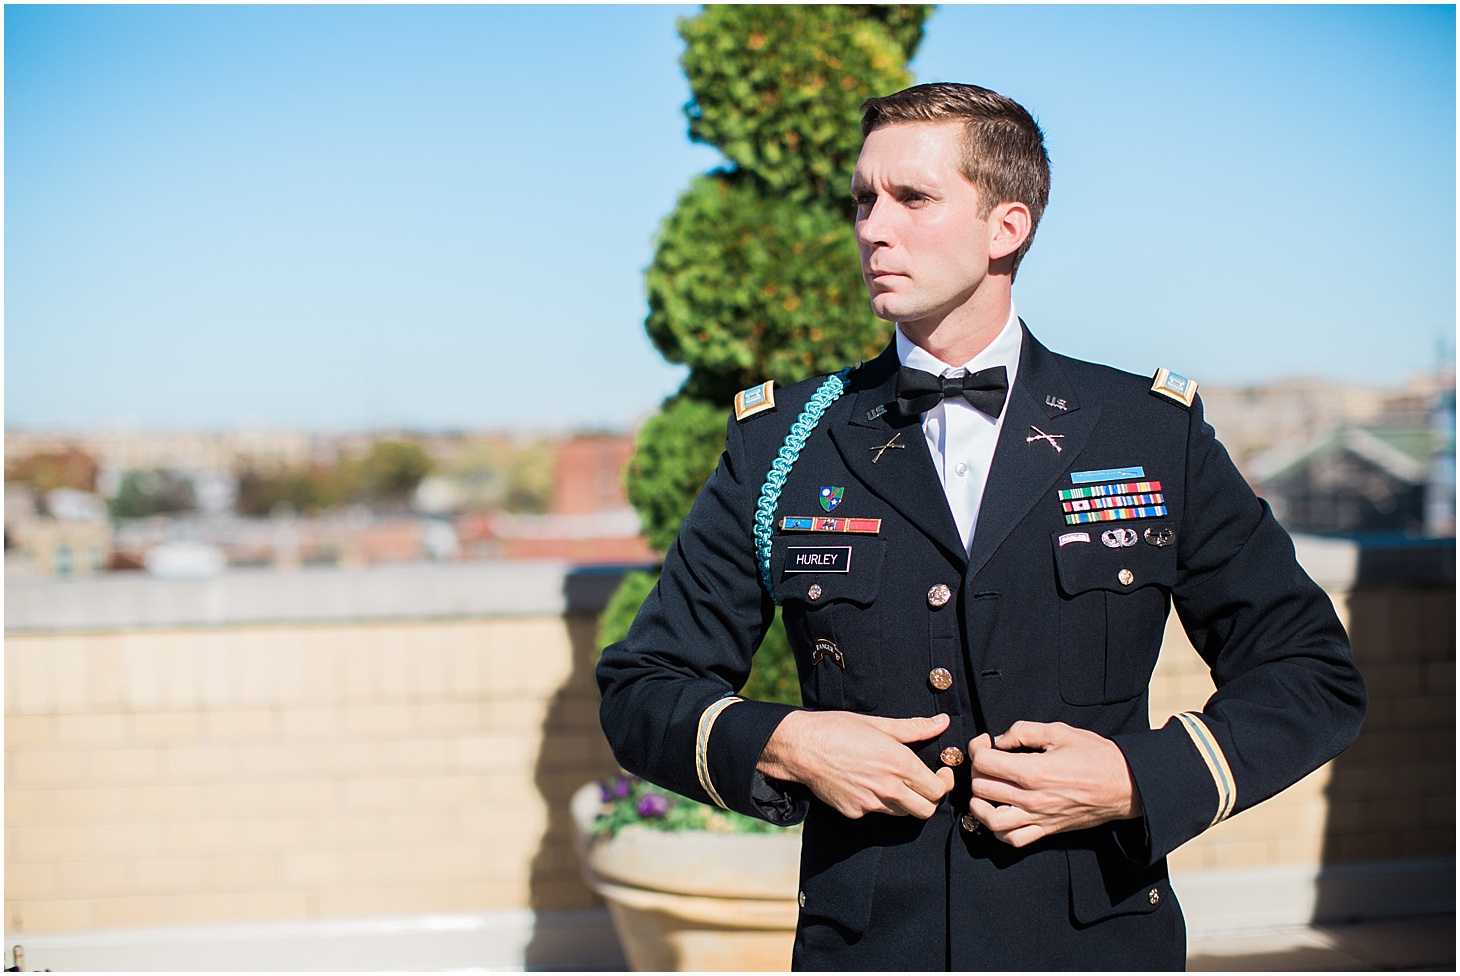 Groom Portrait in Army Service Uniform | Wedding Ceremony at Old Presbyterian Meeting House | Southern Black Tie wedding at St. Regis DC in Dusty Blue and Ivory | Sarah Bradshaw Photography